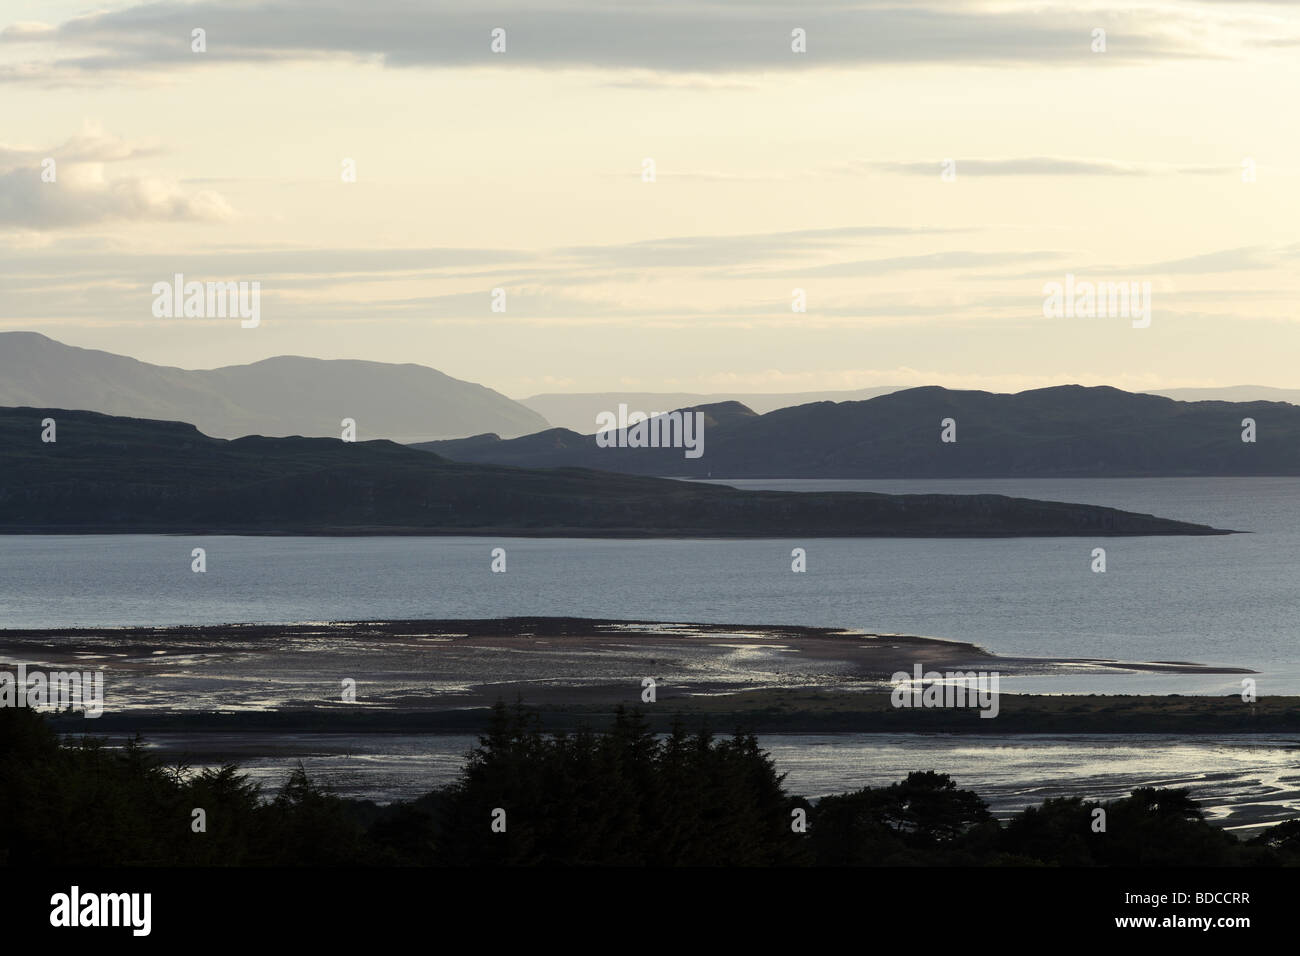 Evening sunshine over the Islands of Little Cumbrae, Bute and Arran in the Firth of Clyde on the West Coast of Scotland, UK Stock Photo